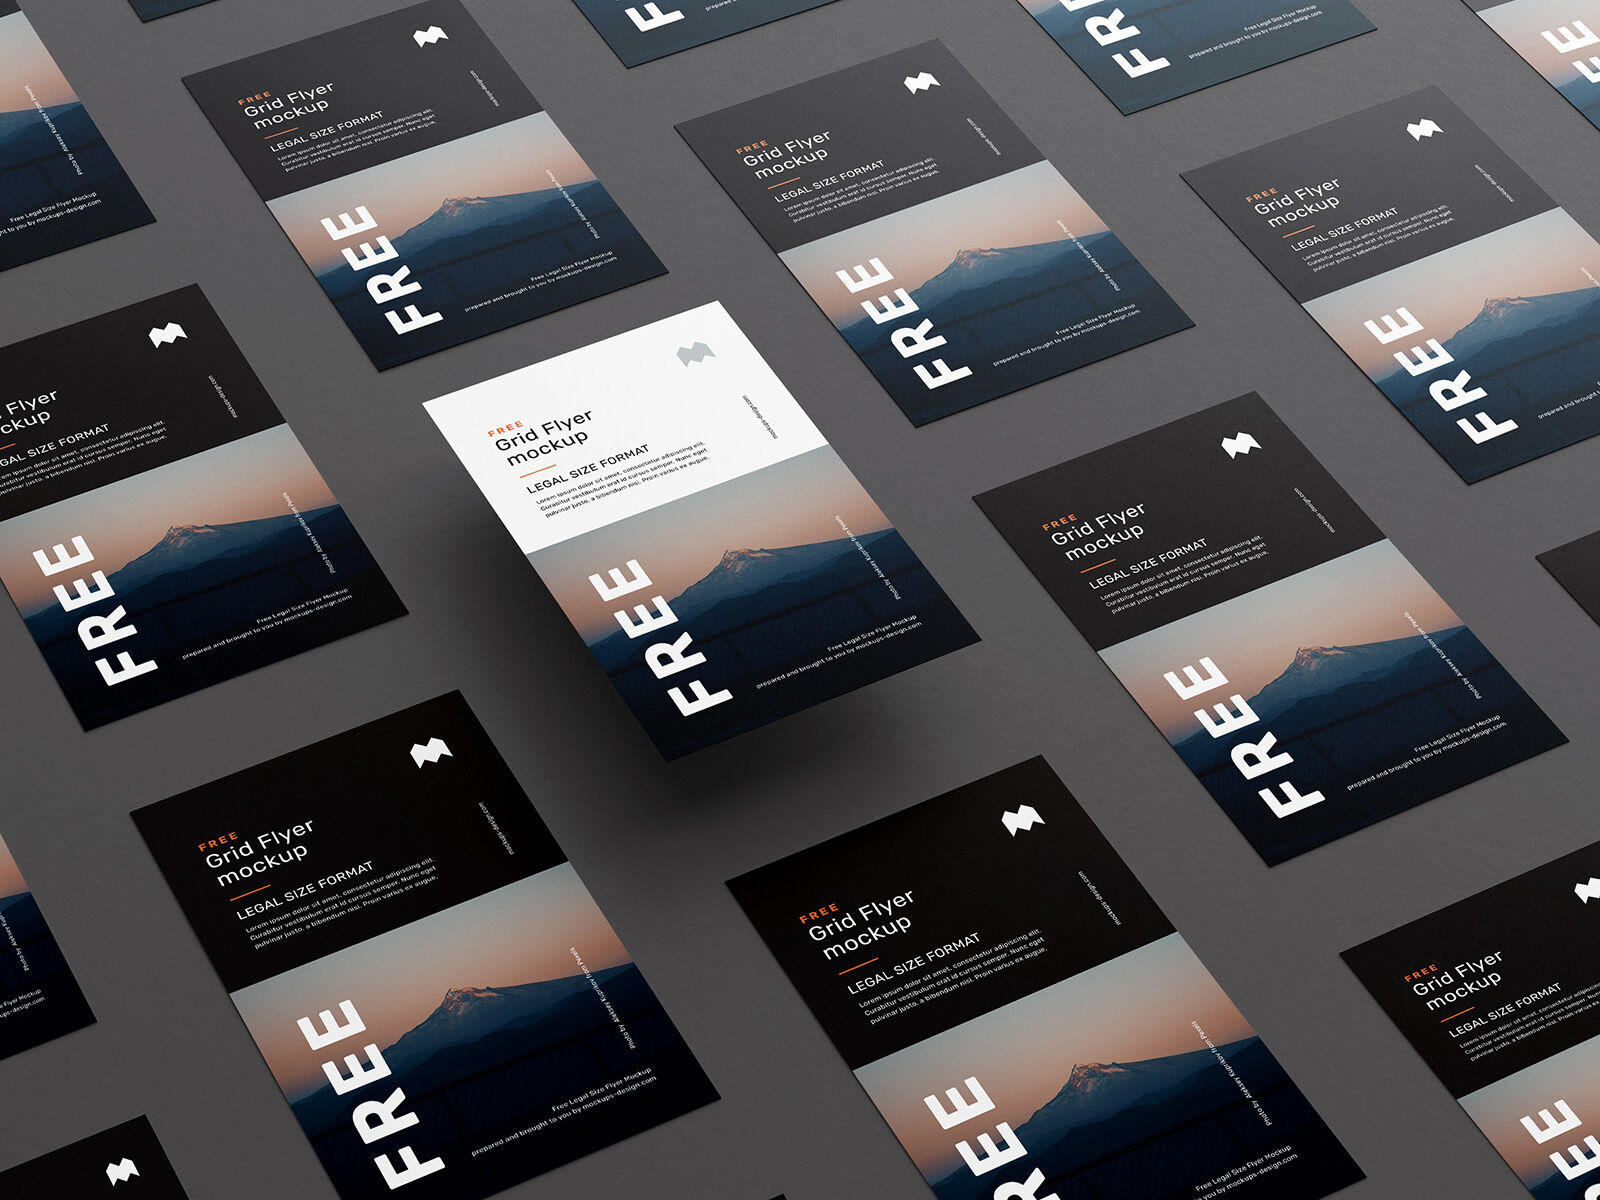 6 Grid Mockups of Flyers in Various Shots FREE PSD